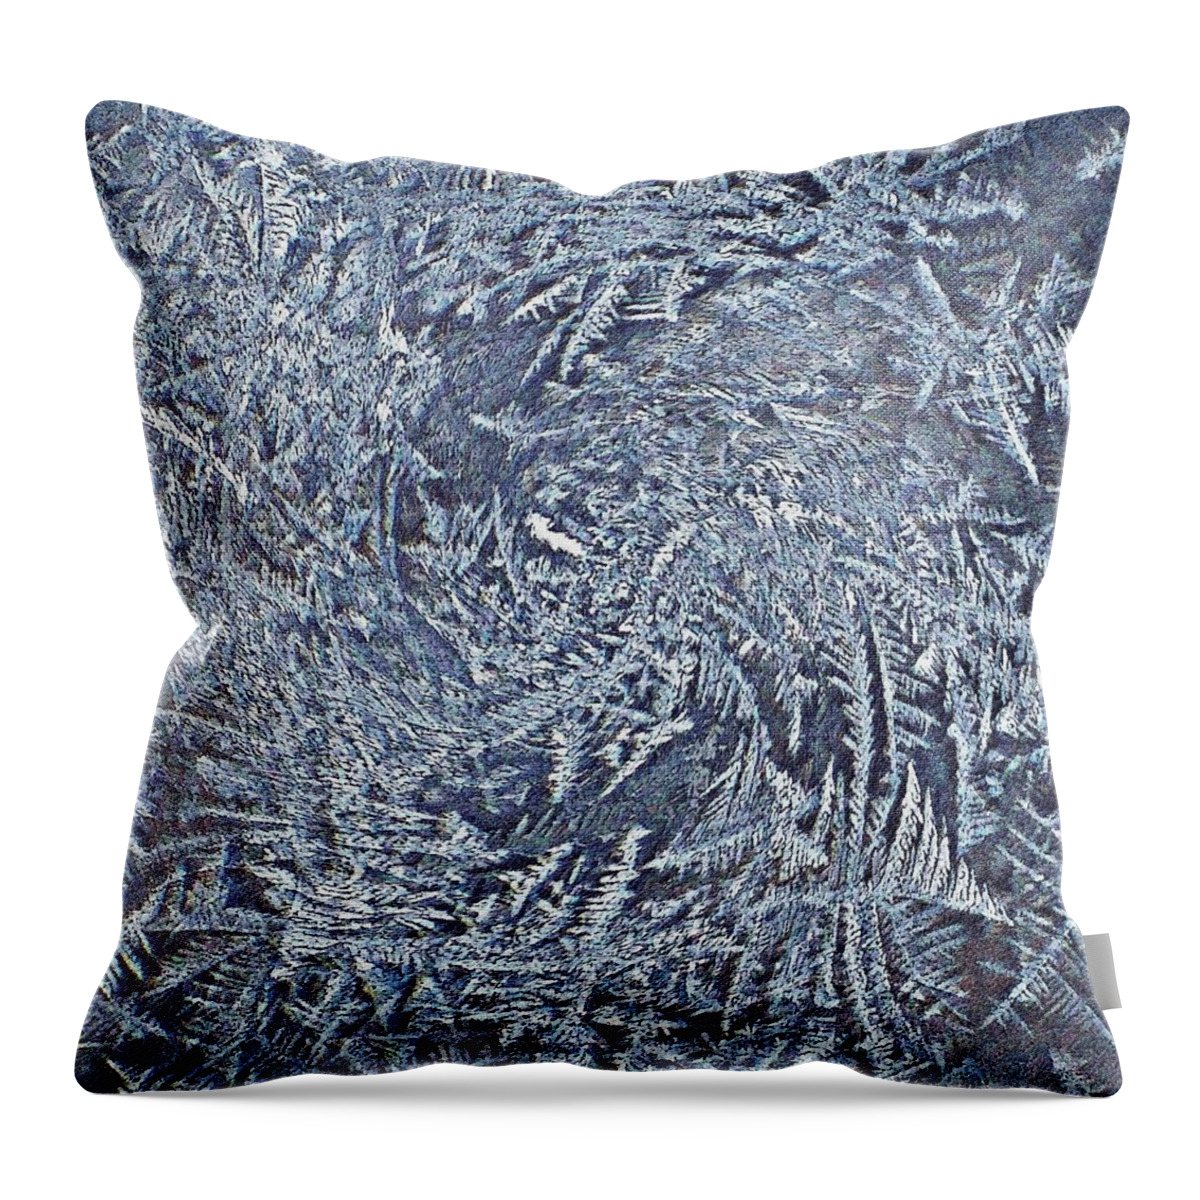 Frosty Swirl Blue Ice Throw Pillow featuring the photograph Frosty Swirl Blue Ice by Joy Nichols